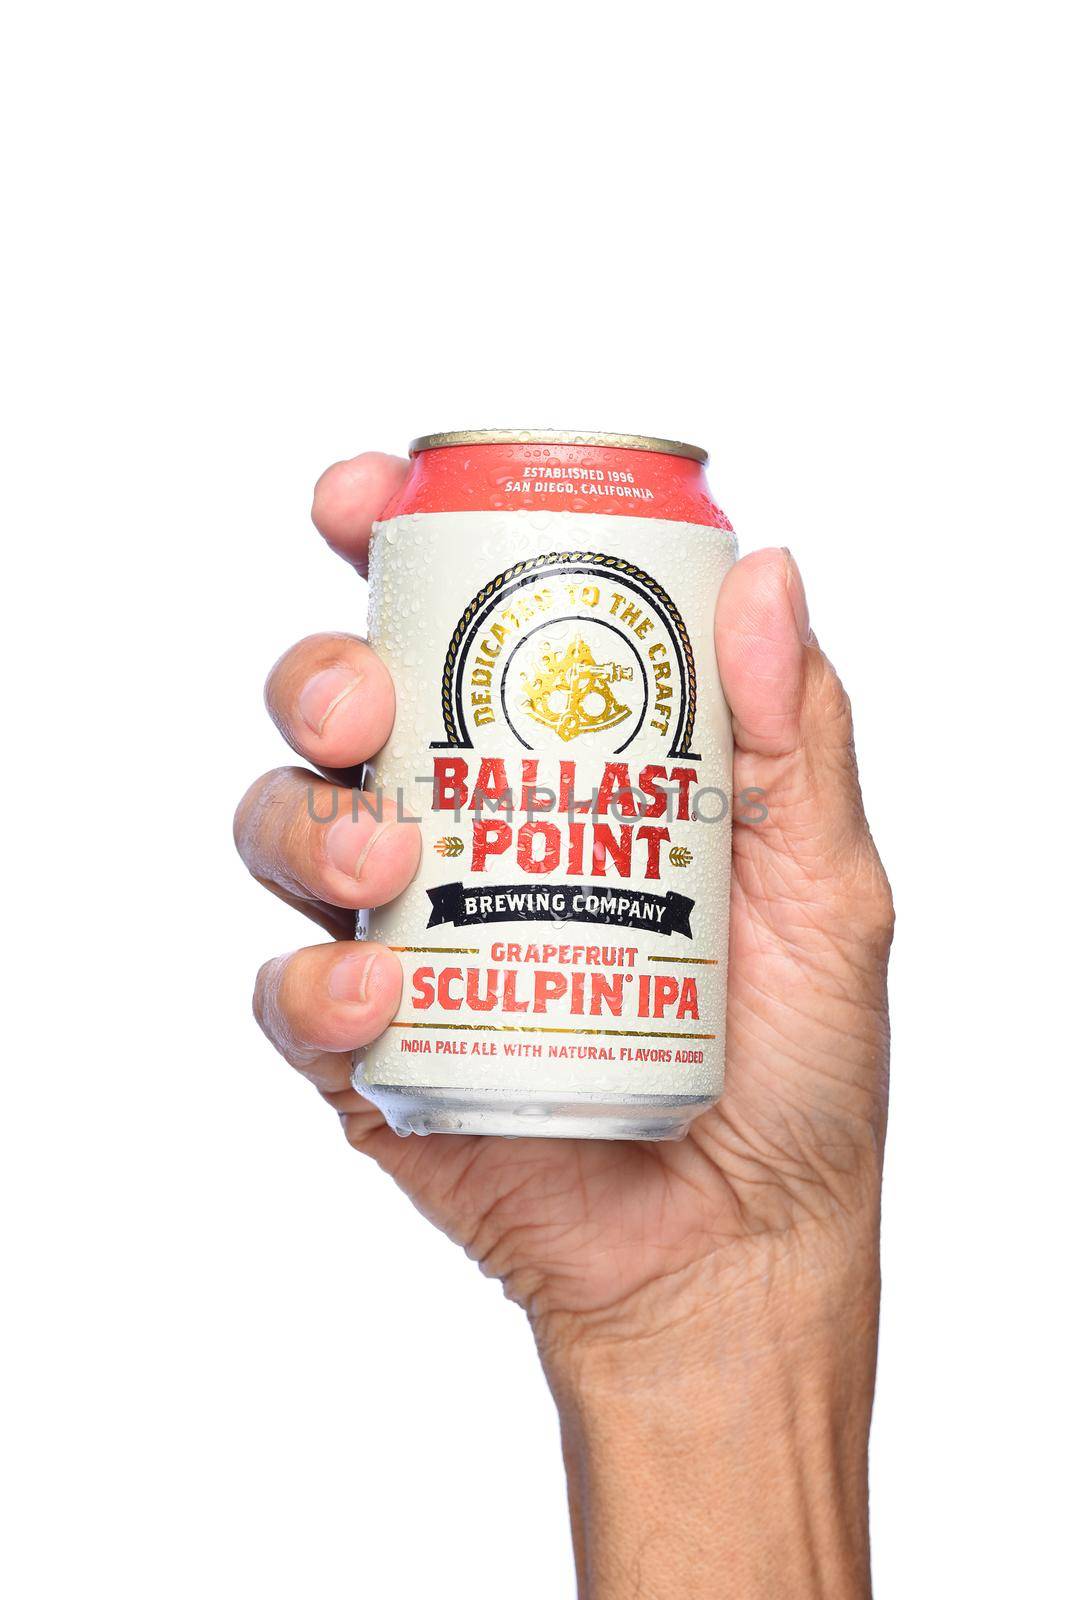 IRVINE, CALIFORNIA - APRIL 26, 2019: Closeup of a hand holding a cold can of Ballast Point Grapefruit Sculpin IPA, with condensation.